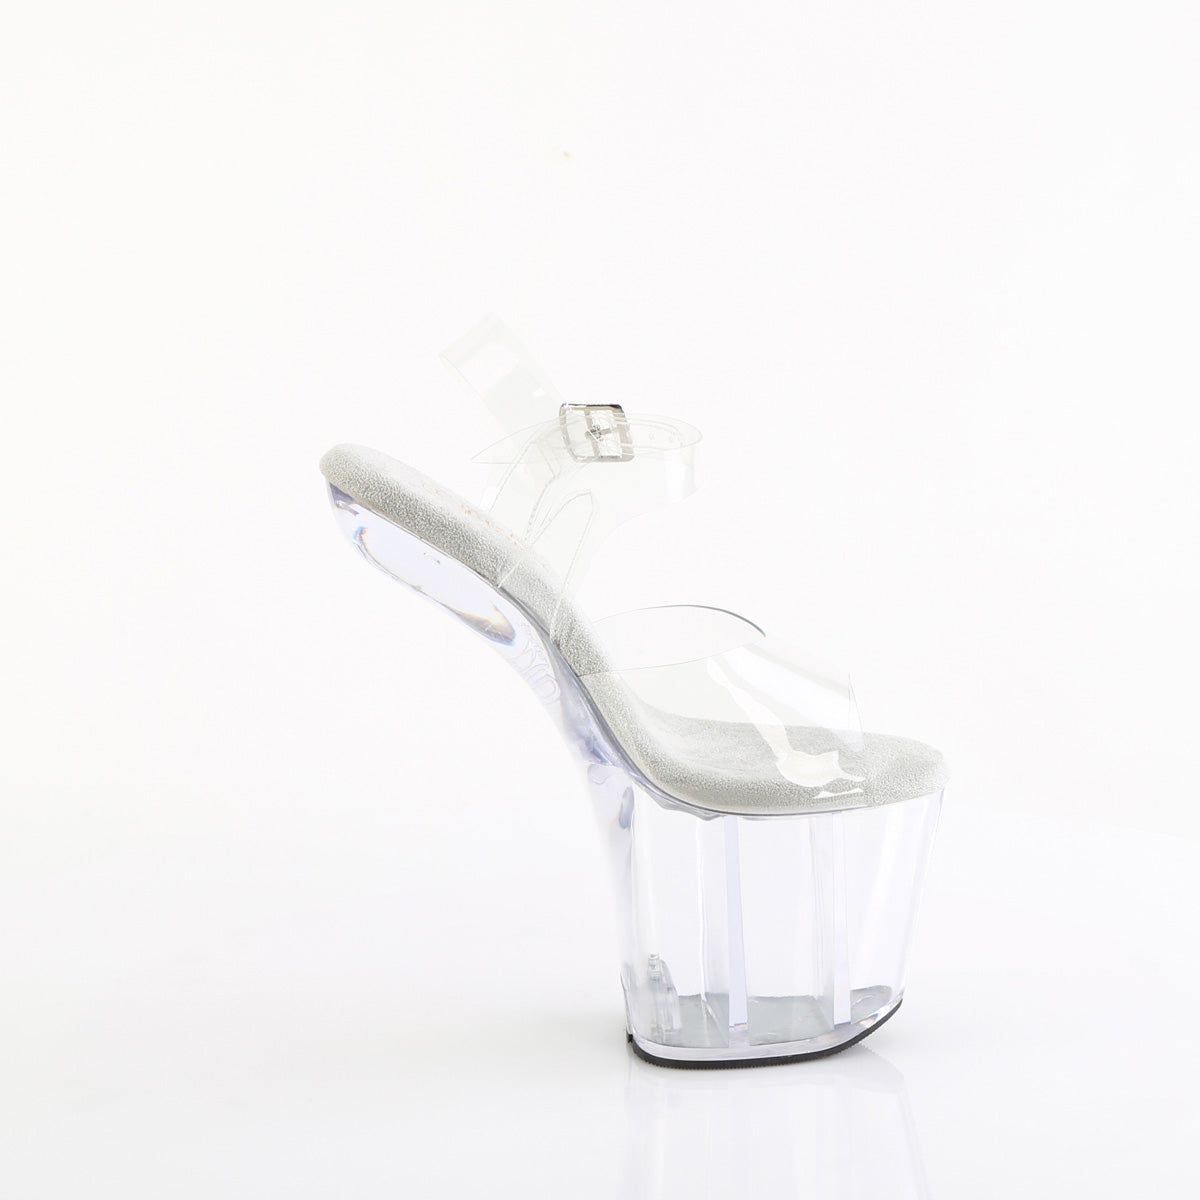 Another Night Clear Platform Heels | Clear strap heels, Clear platform heels,  Heels